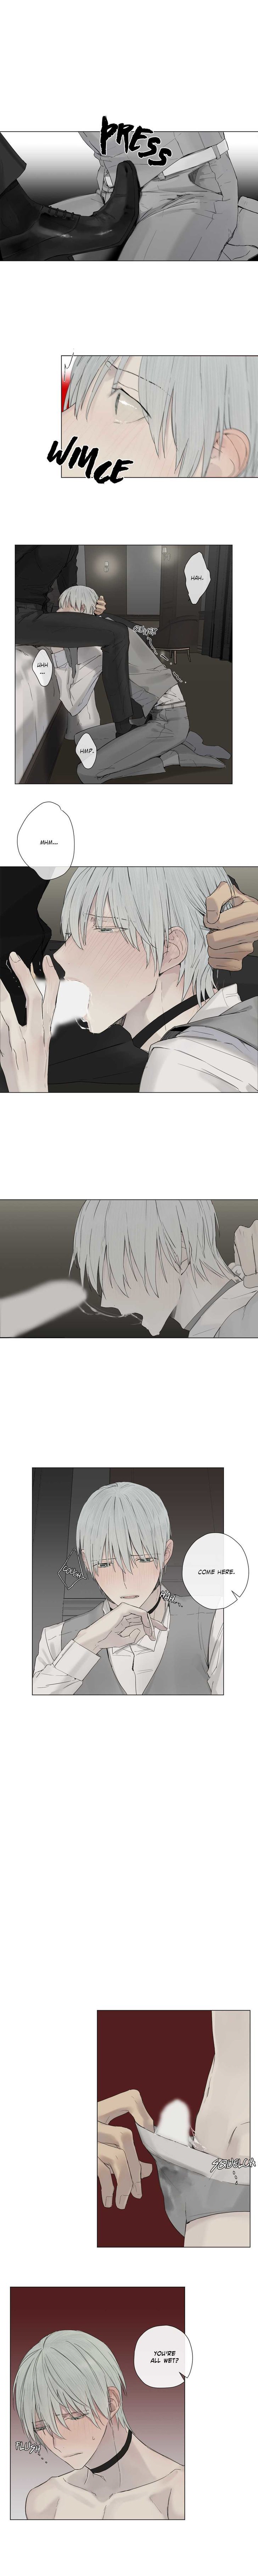 Royal Servant - Chapter 8 Page 1